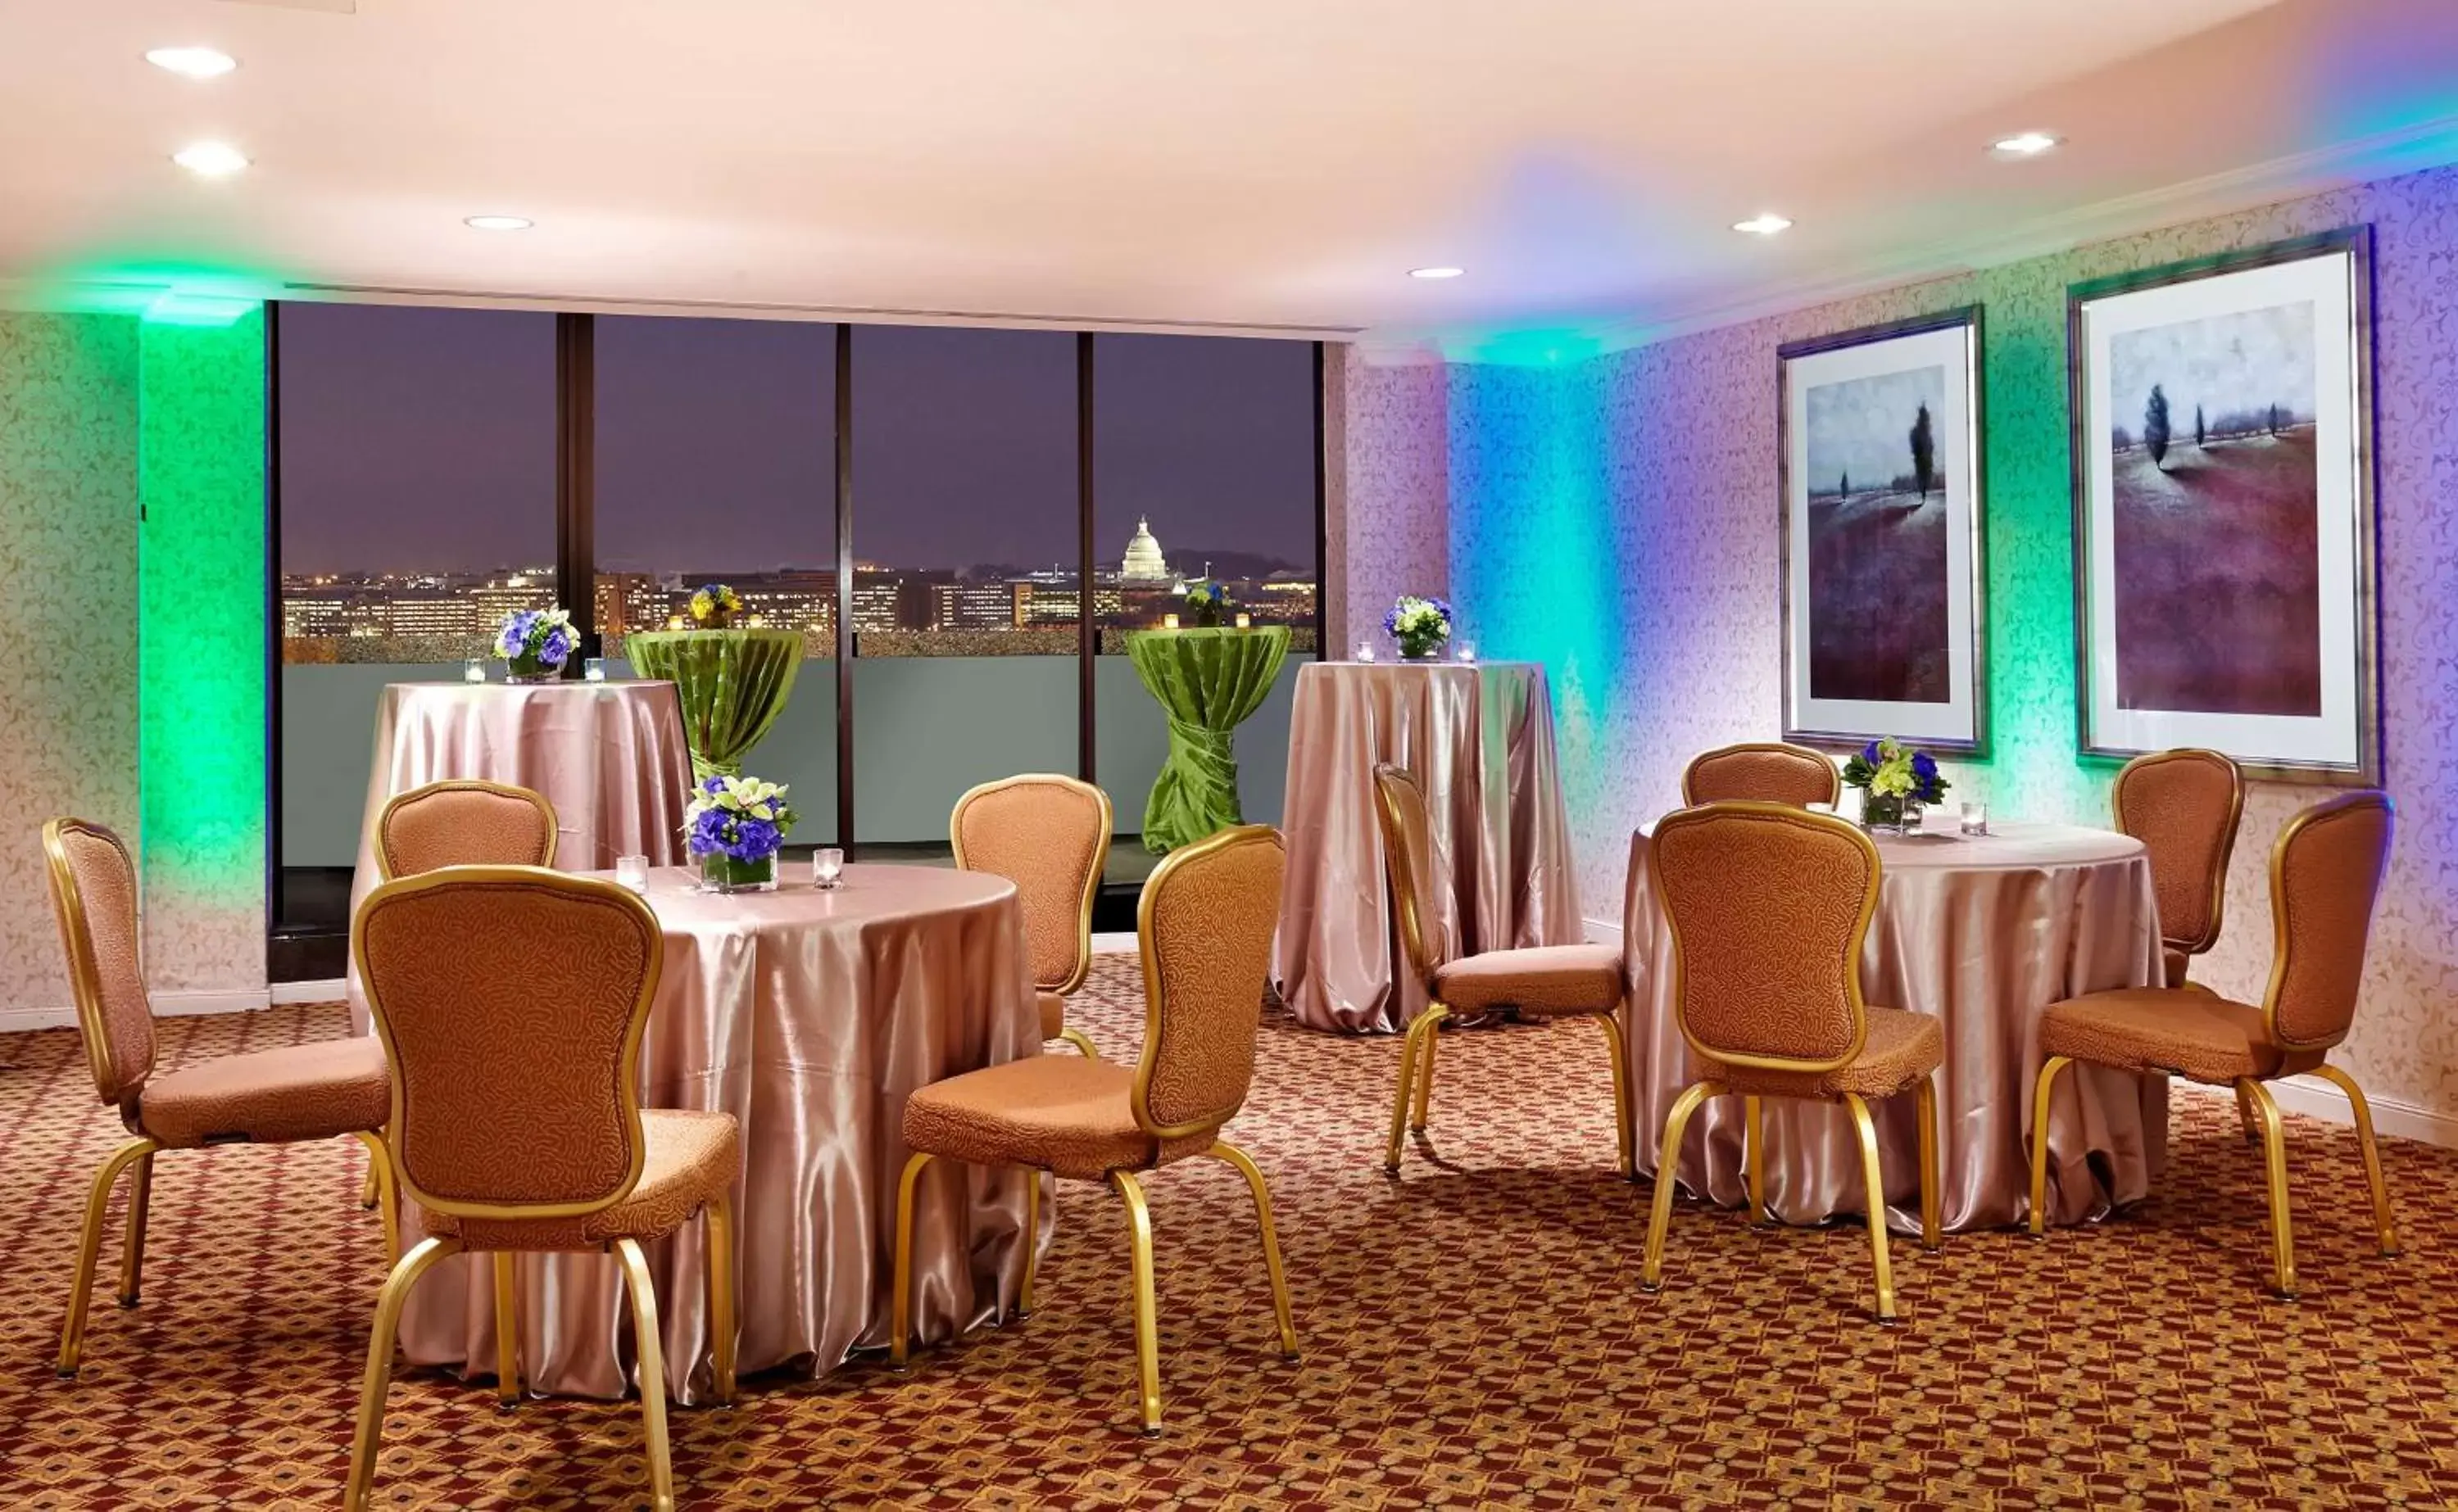 Meeting/conference room, Banquet Facilities in DoubleTree by Hilton Washington DC – Crystal City